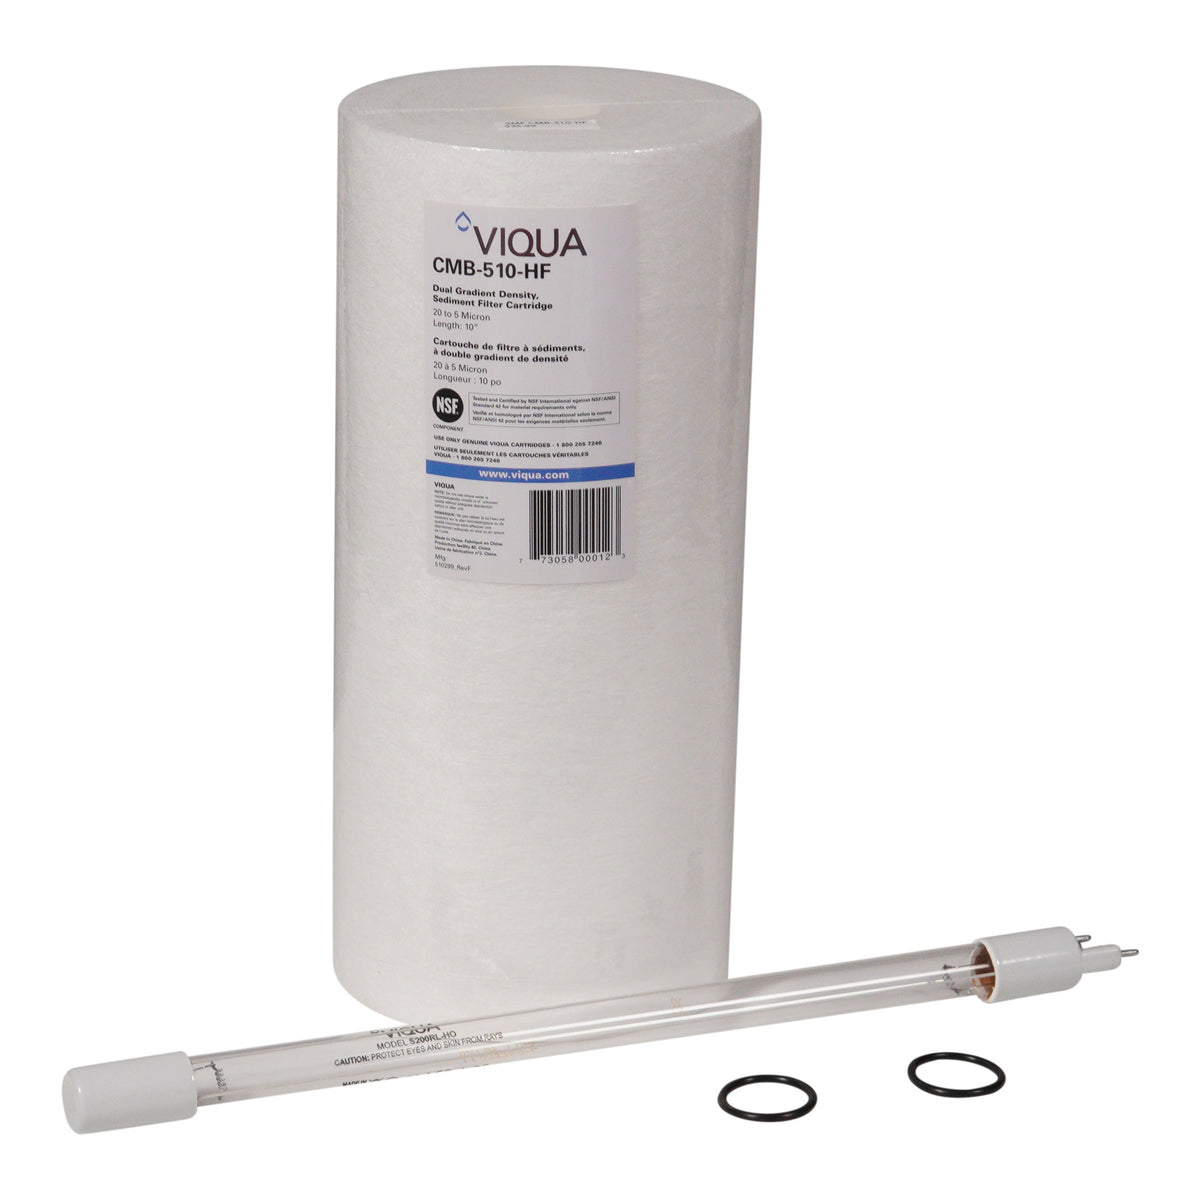 Viqua VH200-F10 Genuine Replacement UV Lamp and Filter | Free Ship